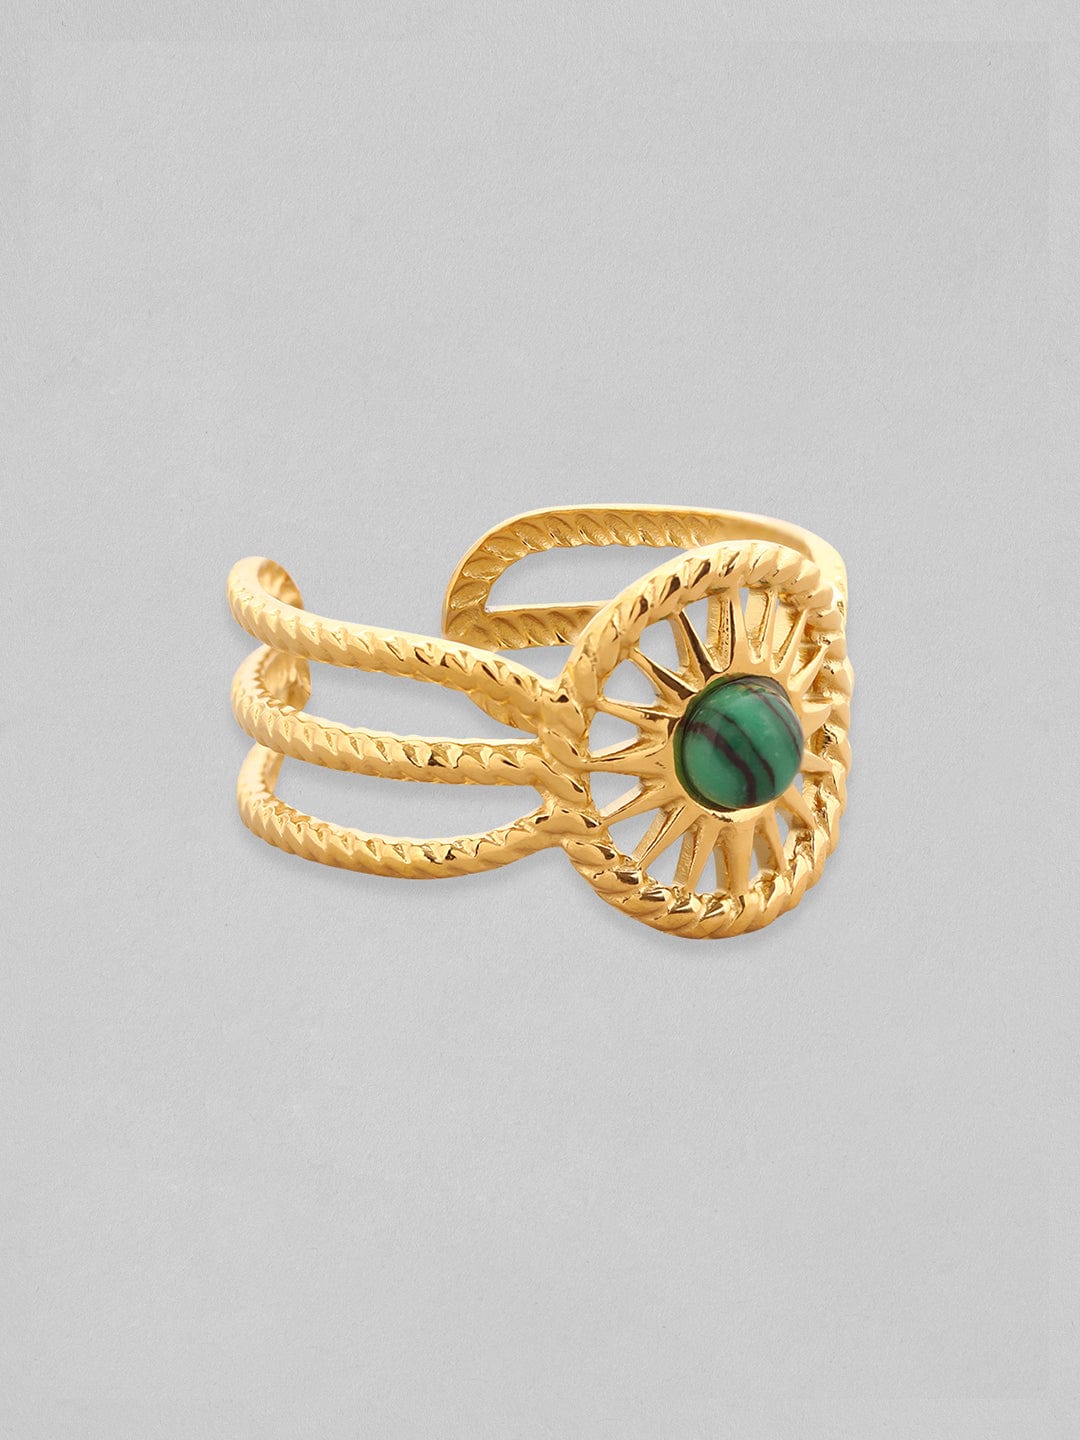 Rubans Voguish 18K Gold Plated Twisted Texture Green Stone Adjustable Ring Rings